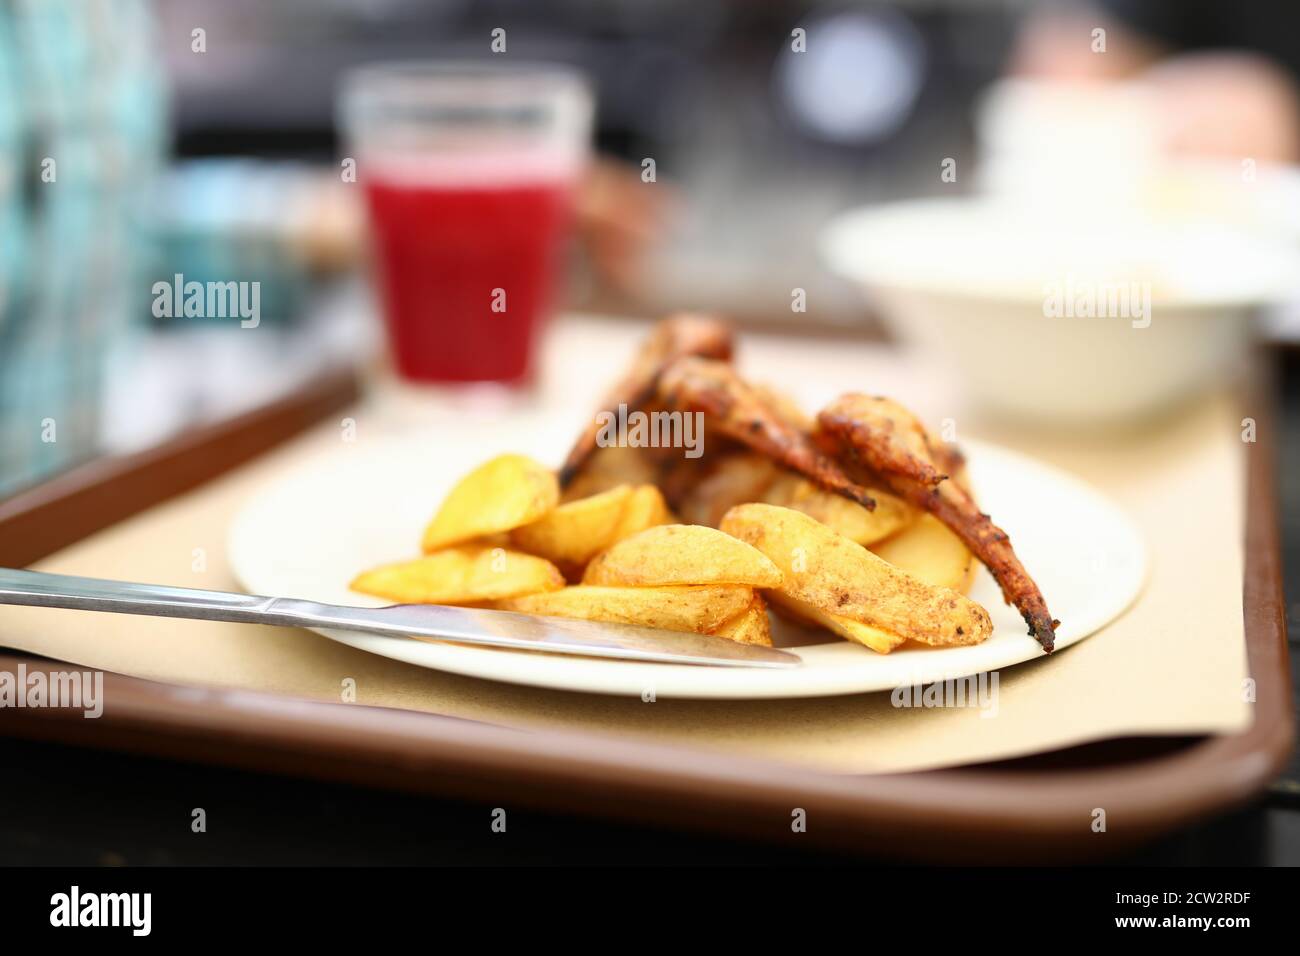 Potatoes and grilled chicken wings on plate. Stock Photo